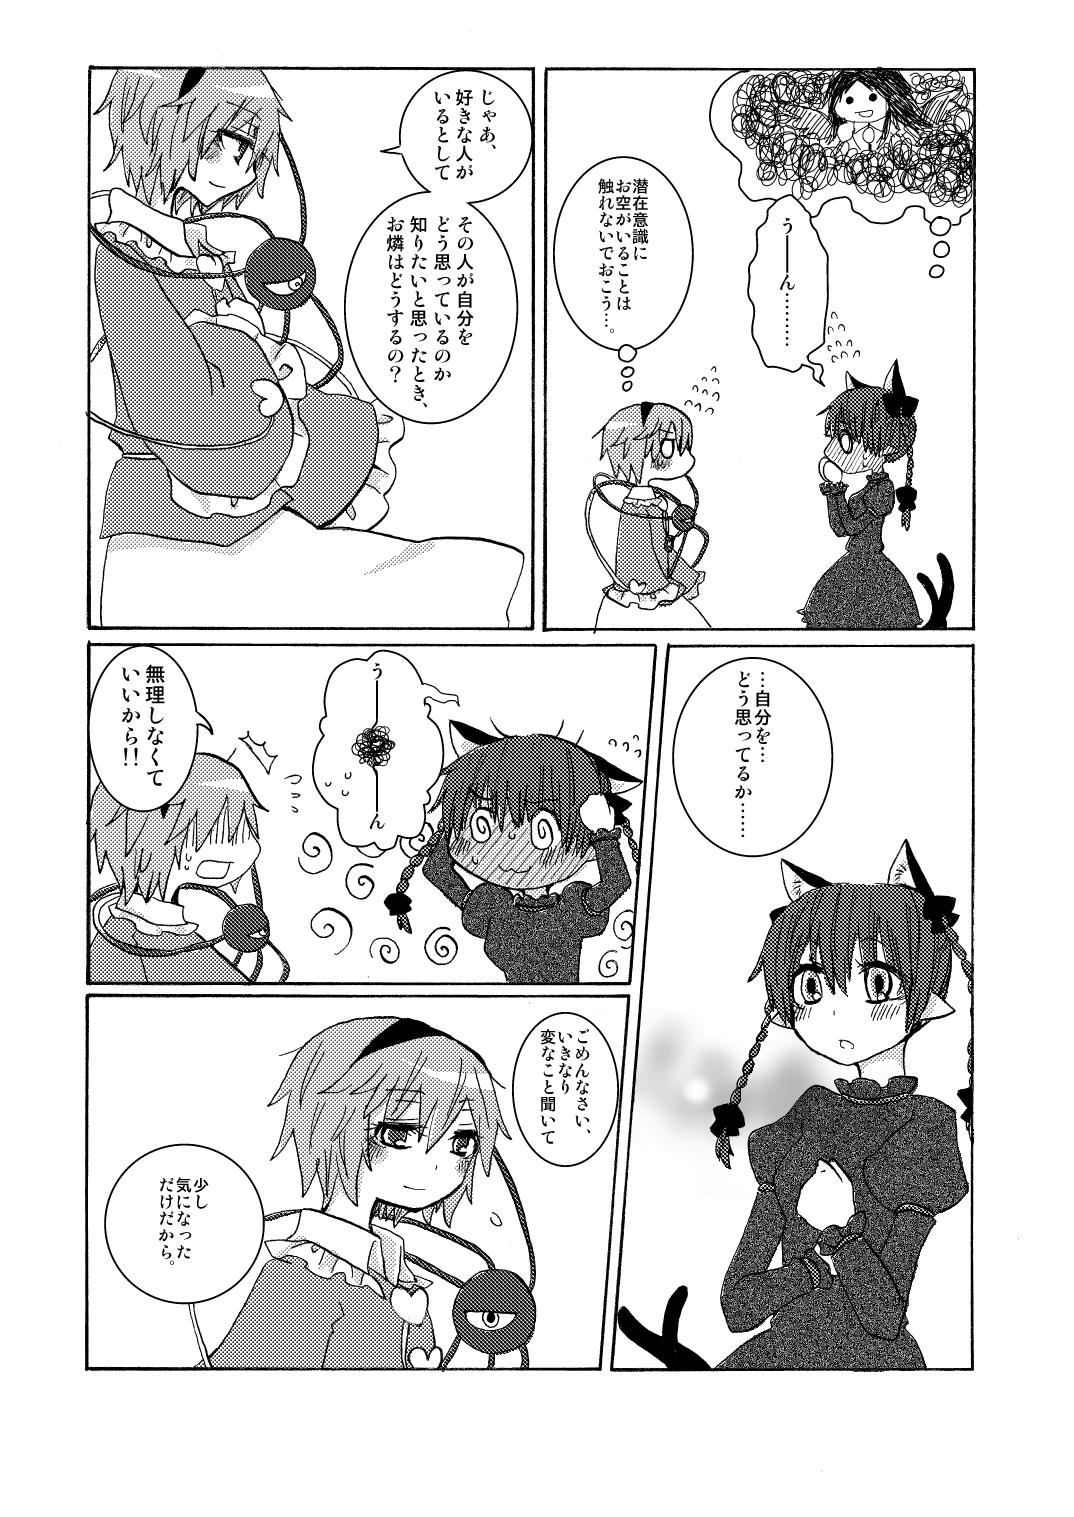 Coed Over. the story of unclenched hearts - Touhou project Indian - Page 11